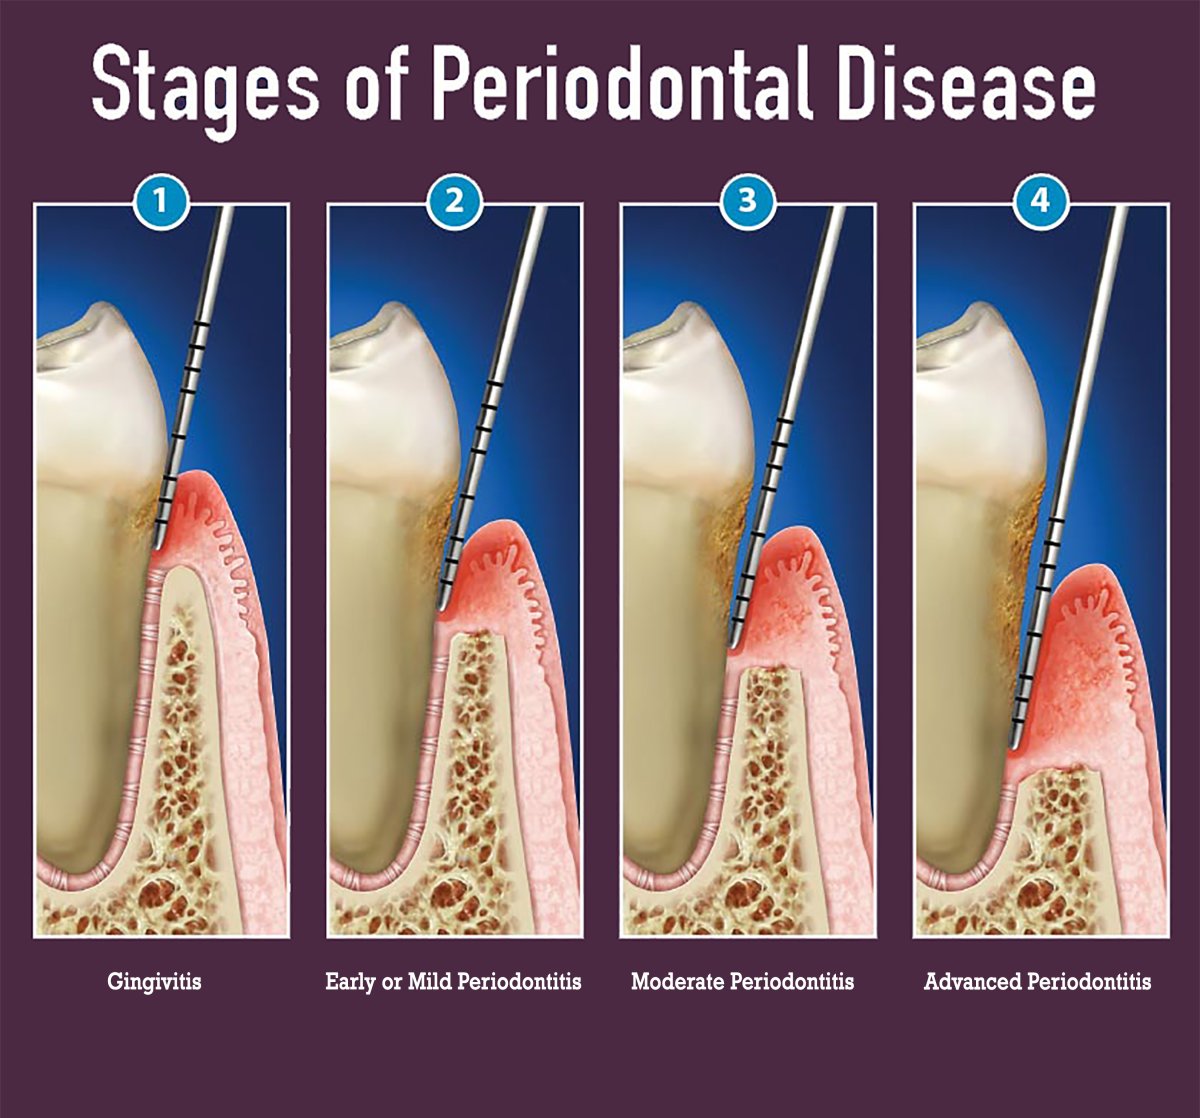 image-773501-graphic-2-stages-of-periodontitis.jpg